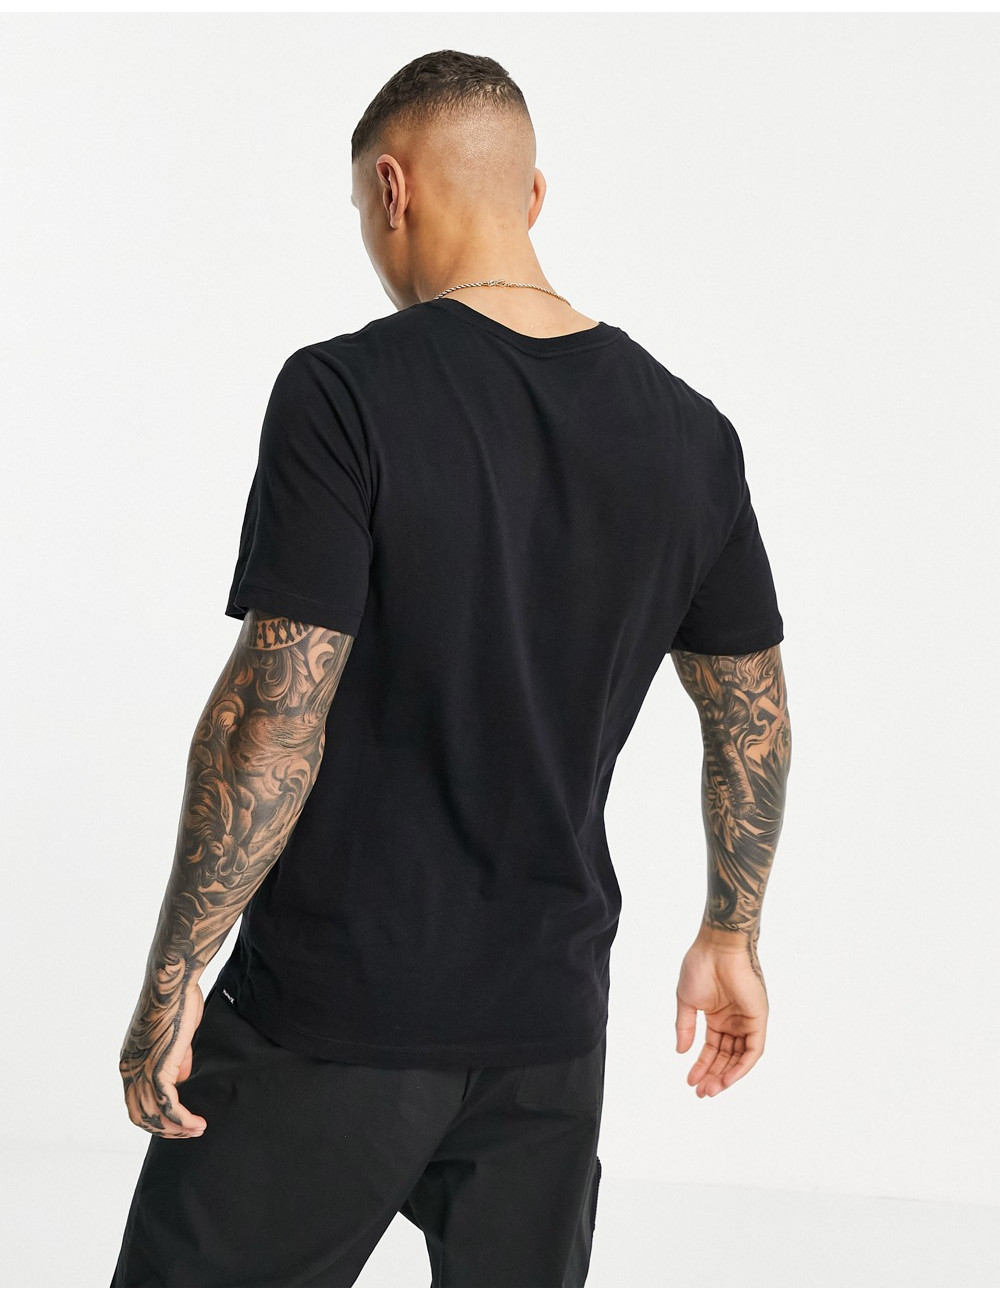 Hurley Solid t-shirt in black